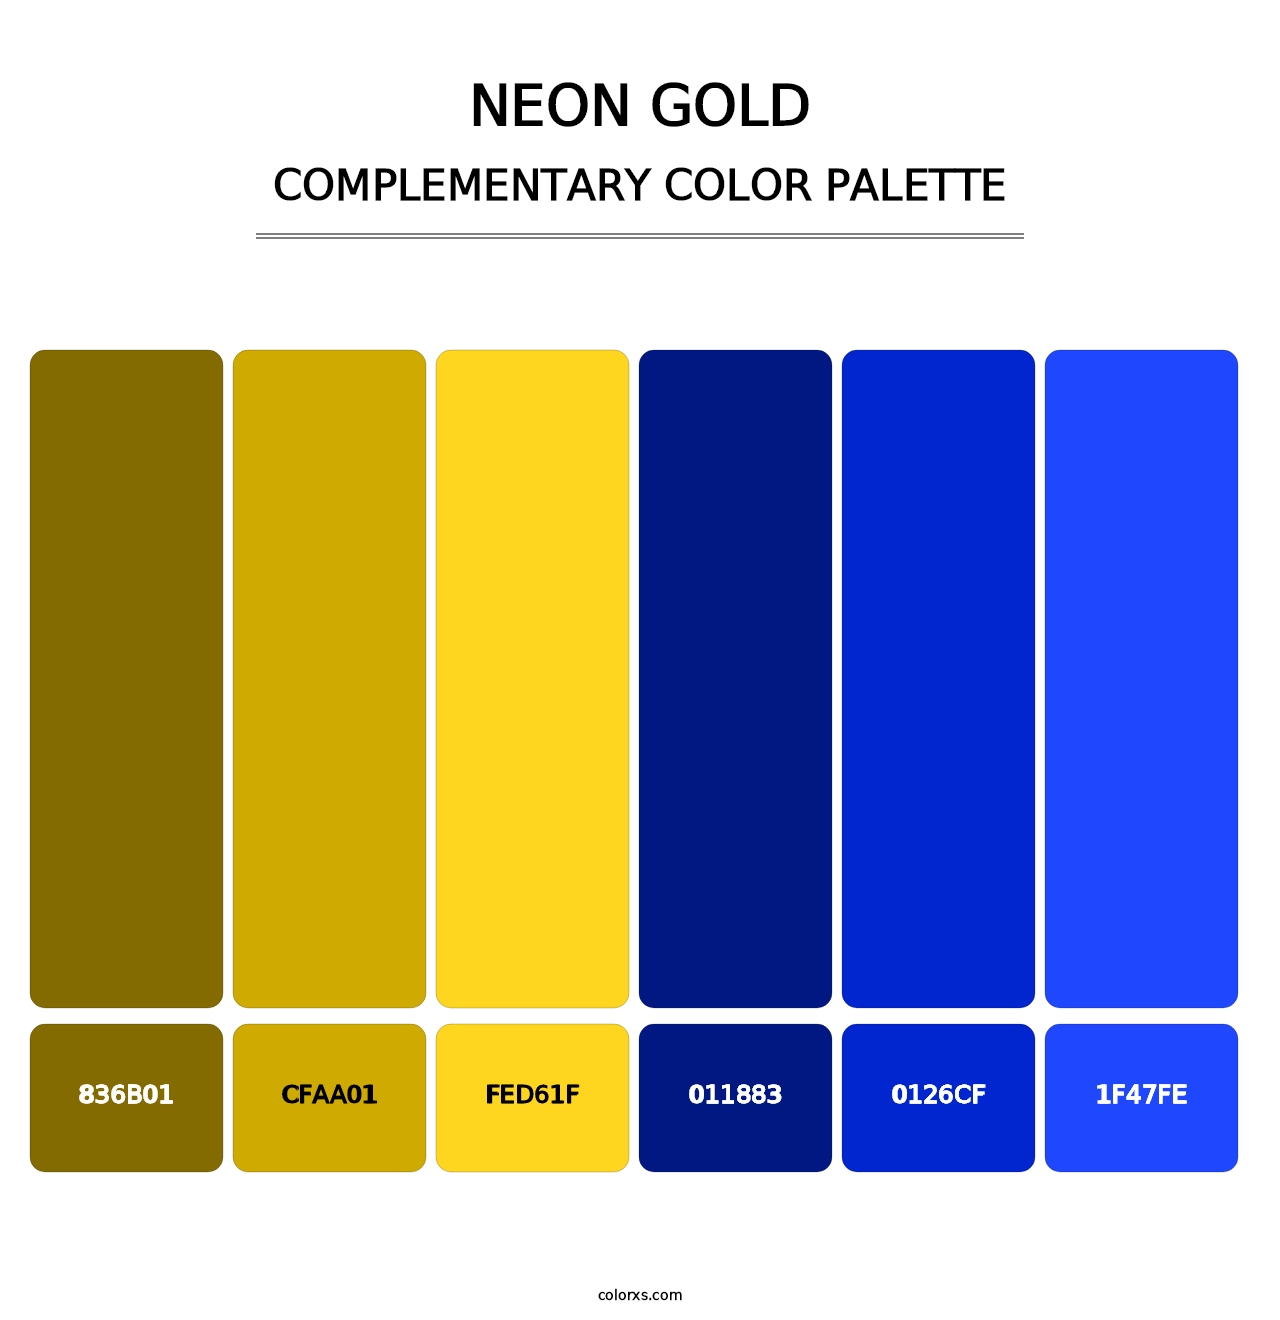 Neon Gold - Complementary Color Palette